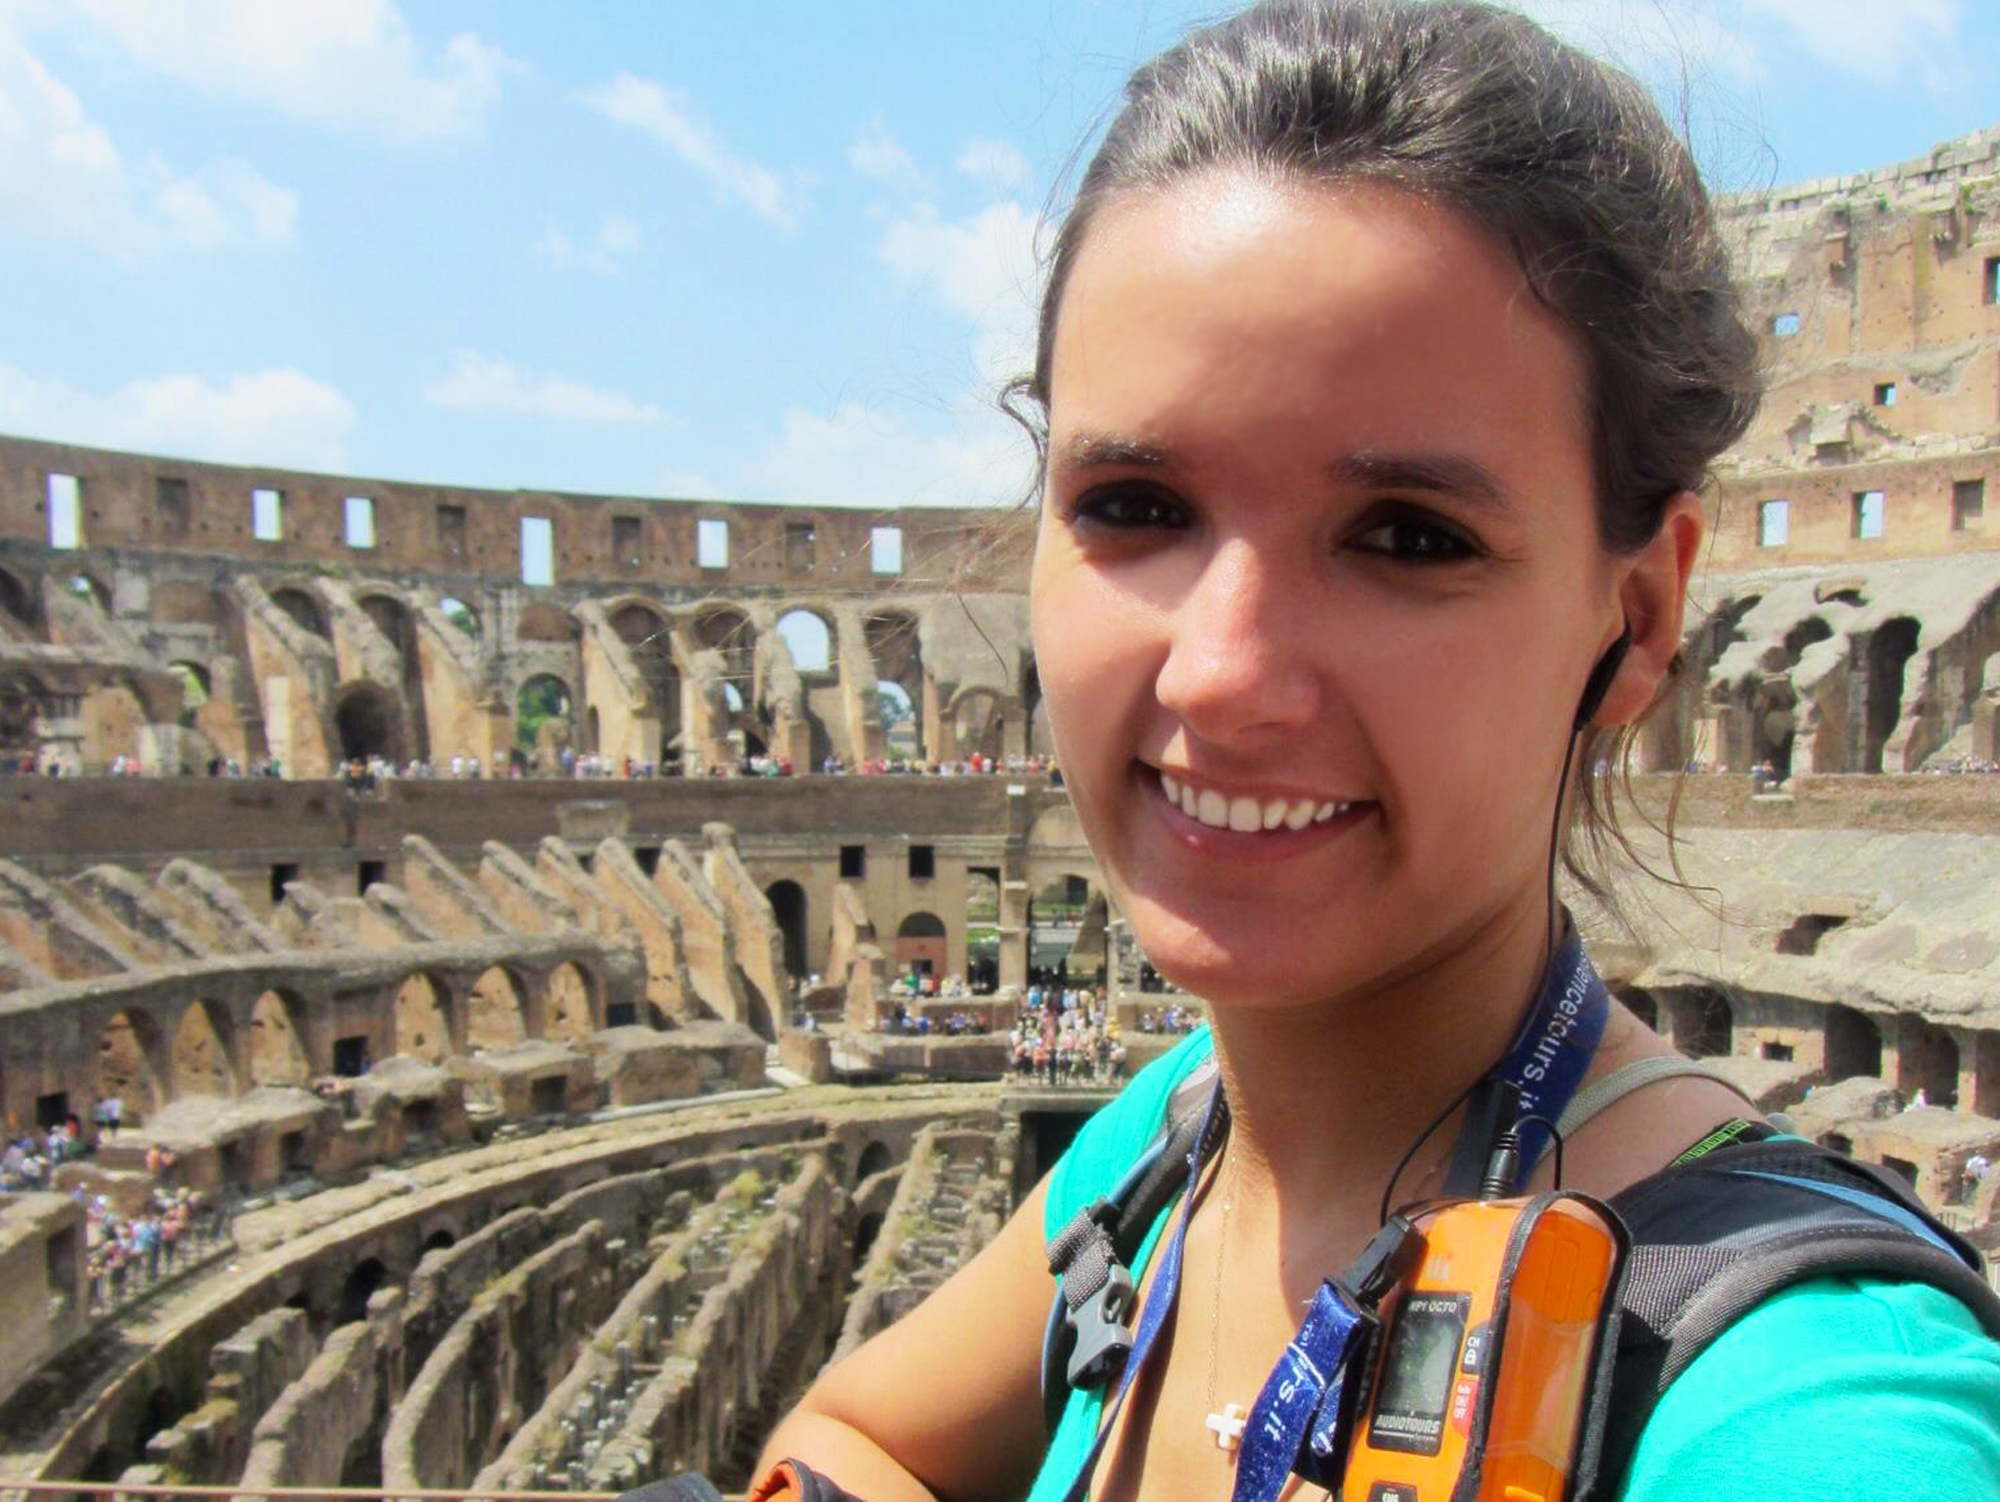 Study Abroad student selfie with The Colosseum, Rome in the background.